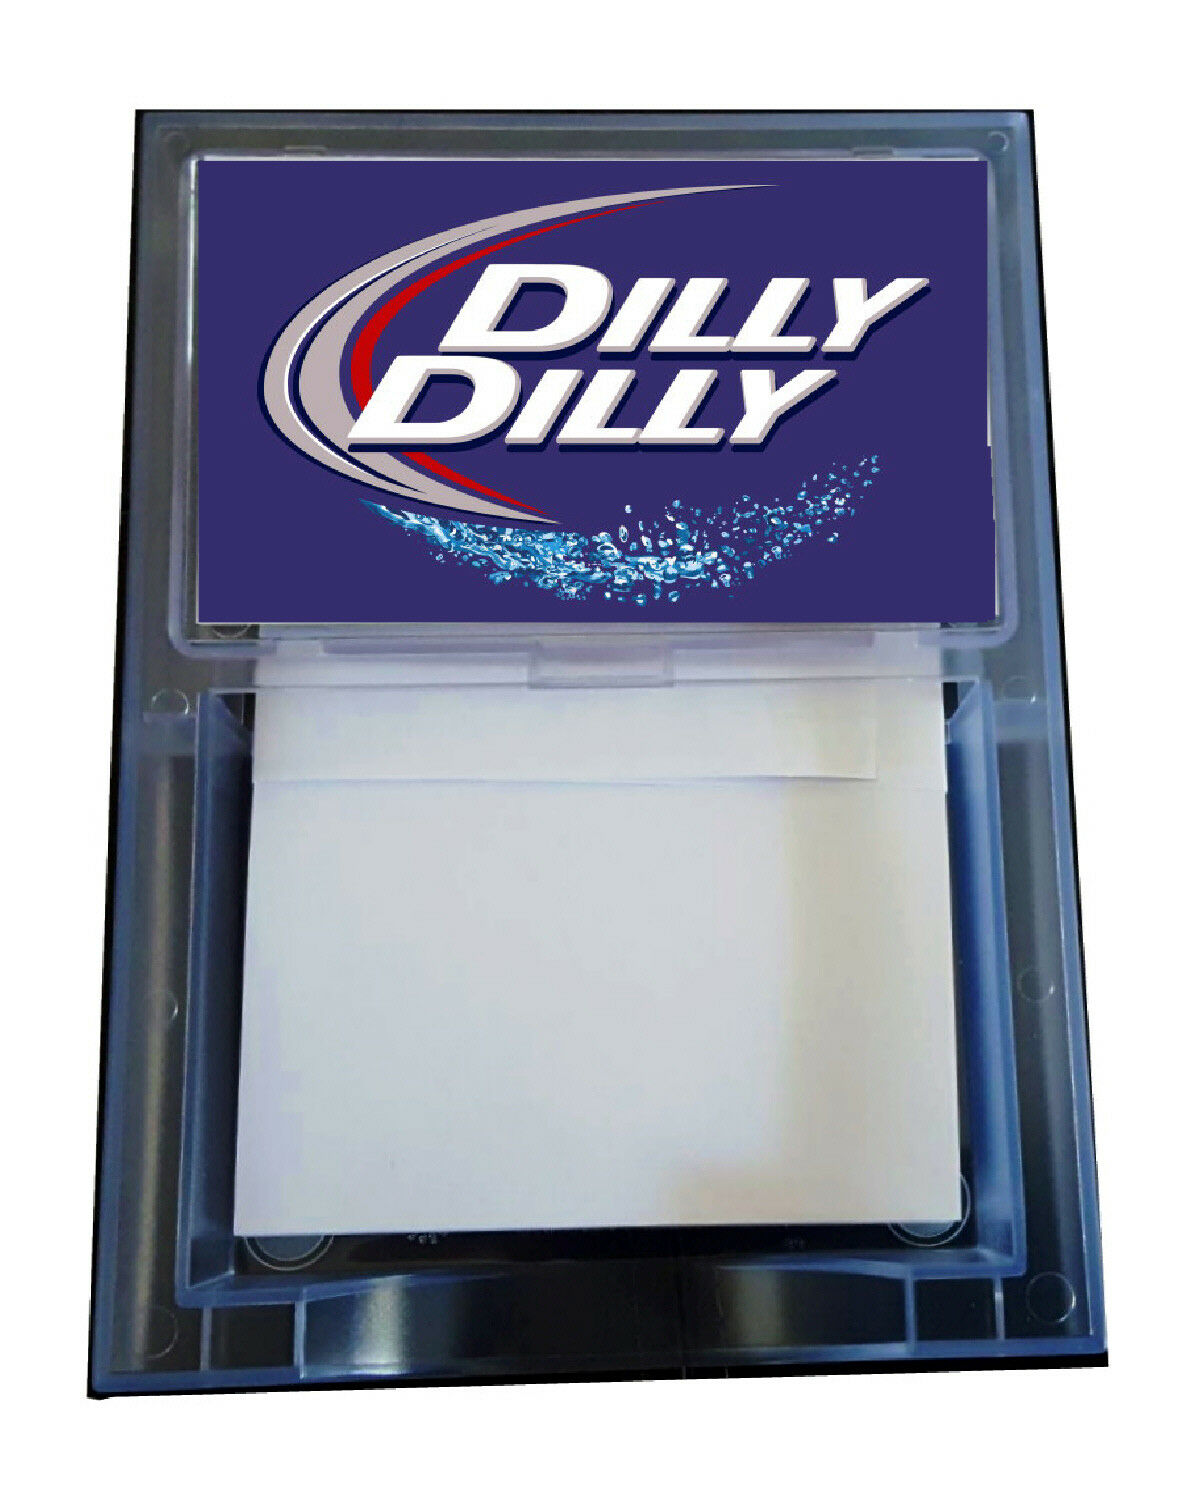 Dilly Dilly Bud Light Note Pad Memo Holder